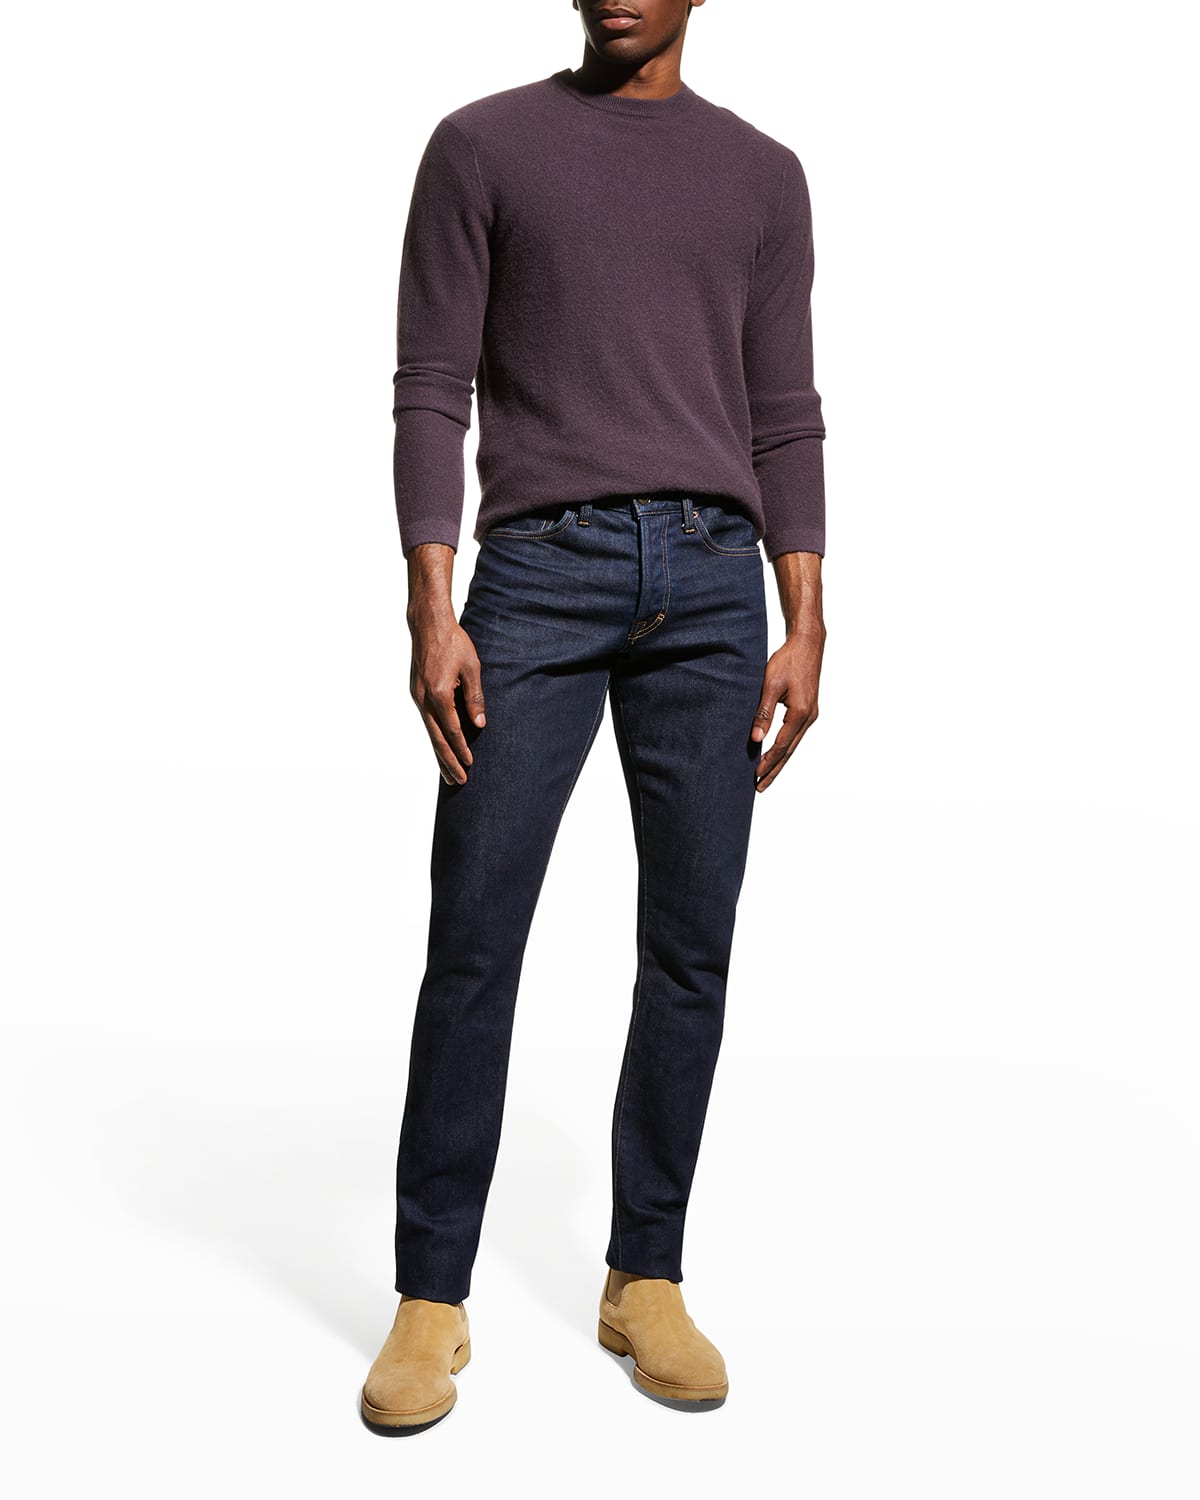 Vince Men's Boiled Cashmere Crew Sweater